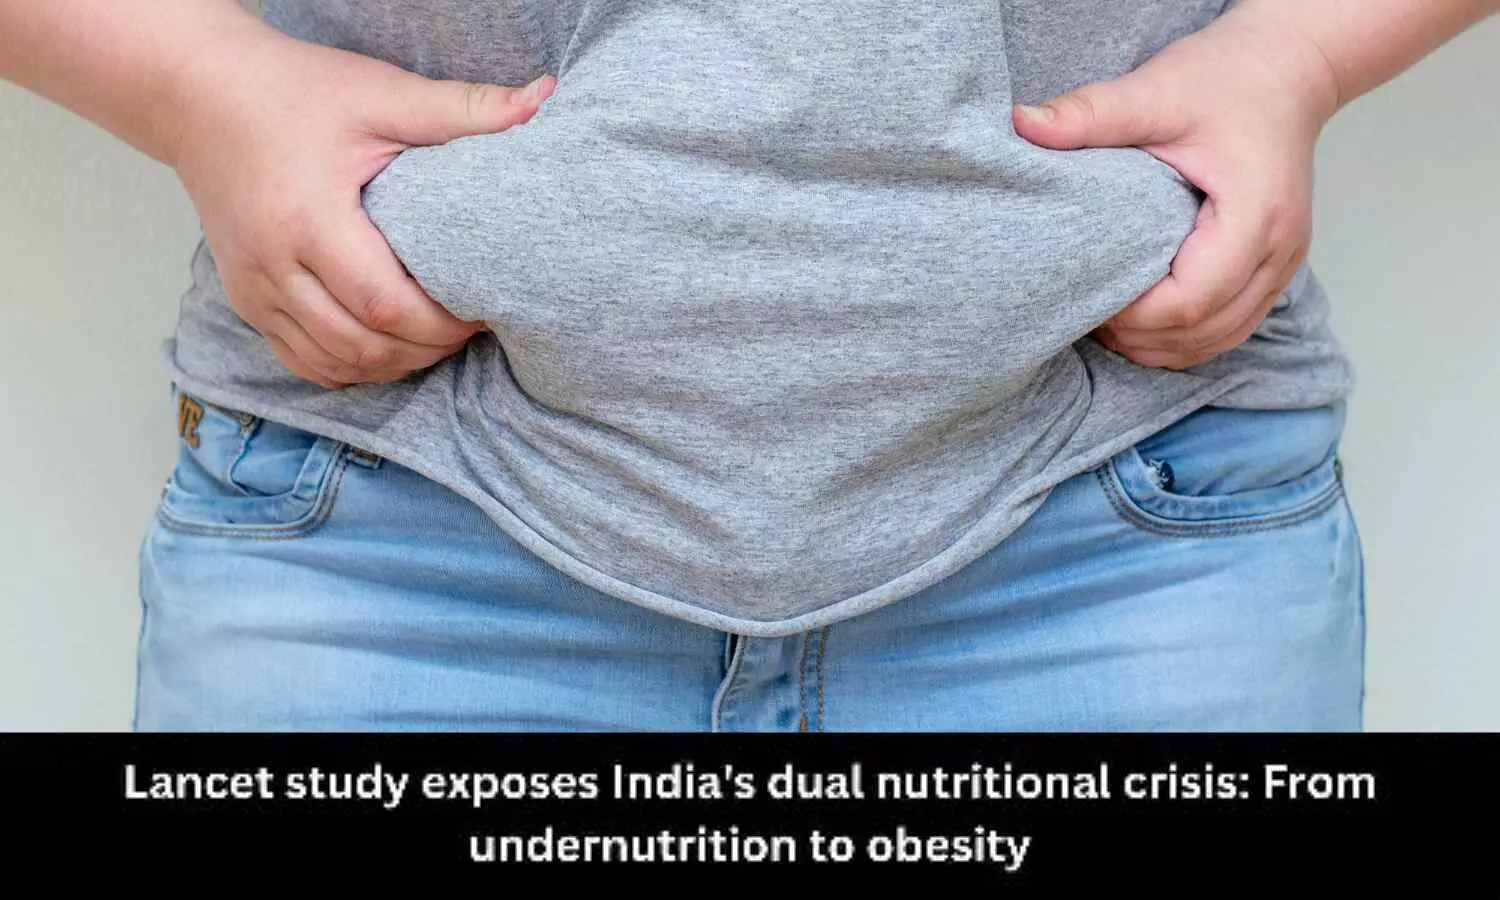 From undernutrition to obesity, Lancet study unveils India’s double whammy